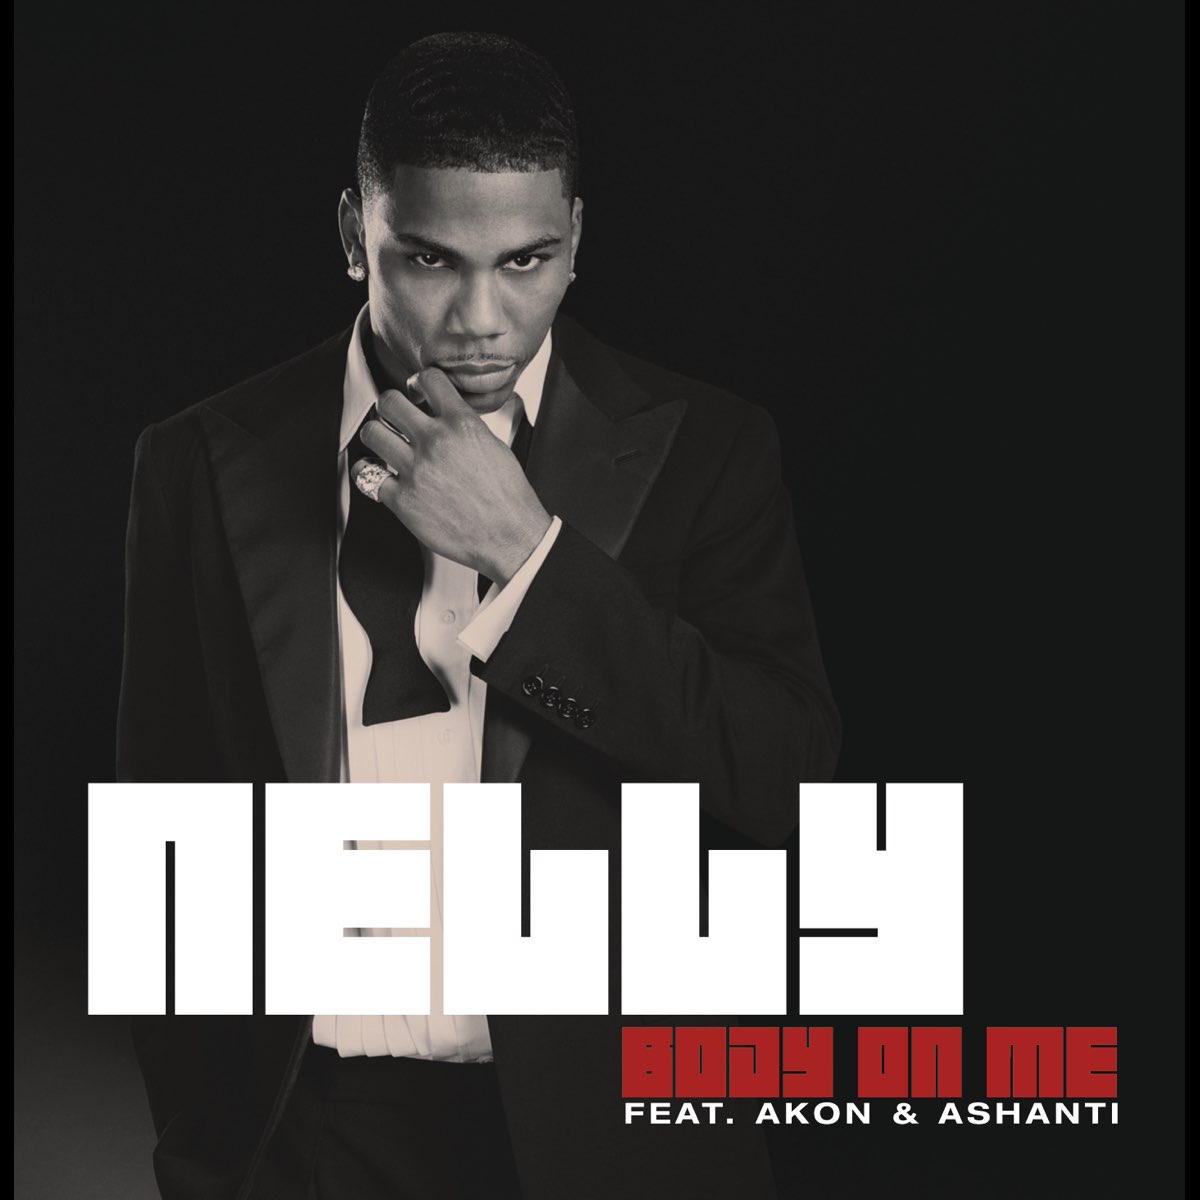 Nelly featuring Akon & Ashanti — Body on Me cover artwork